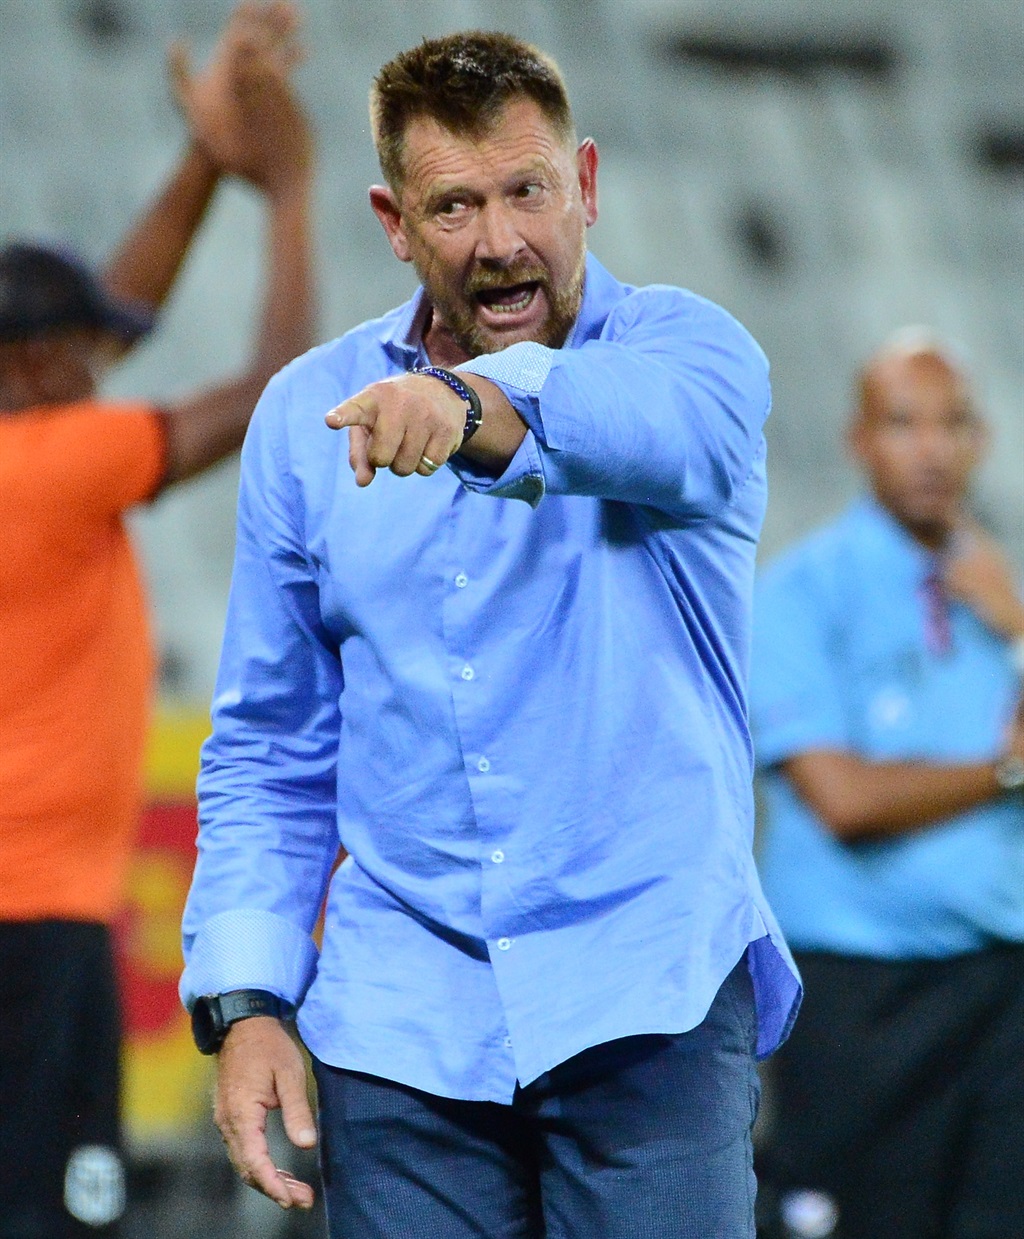 CAPE TOWN, SOUTH AFRICA - FEBRUARY 28: Eric Tinkler (Head Coach) of Cape Town City FC during the DStv Premiership match between Cape Town City FC and SuperSport United at DHL Stadium on February 28, 204 in Cape Town, South Africa. (Photo by Grant Pitcher/Gallo Images)